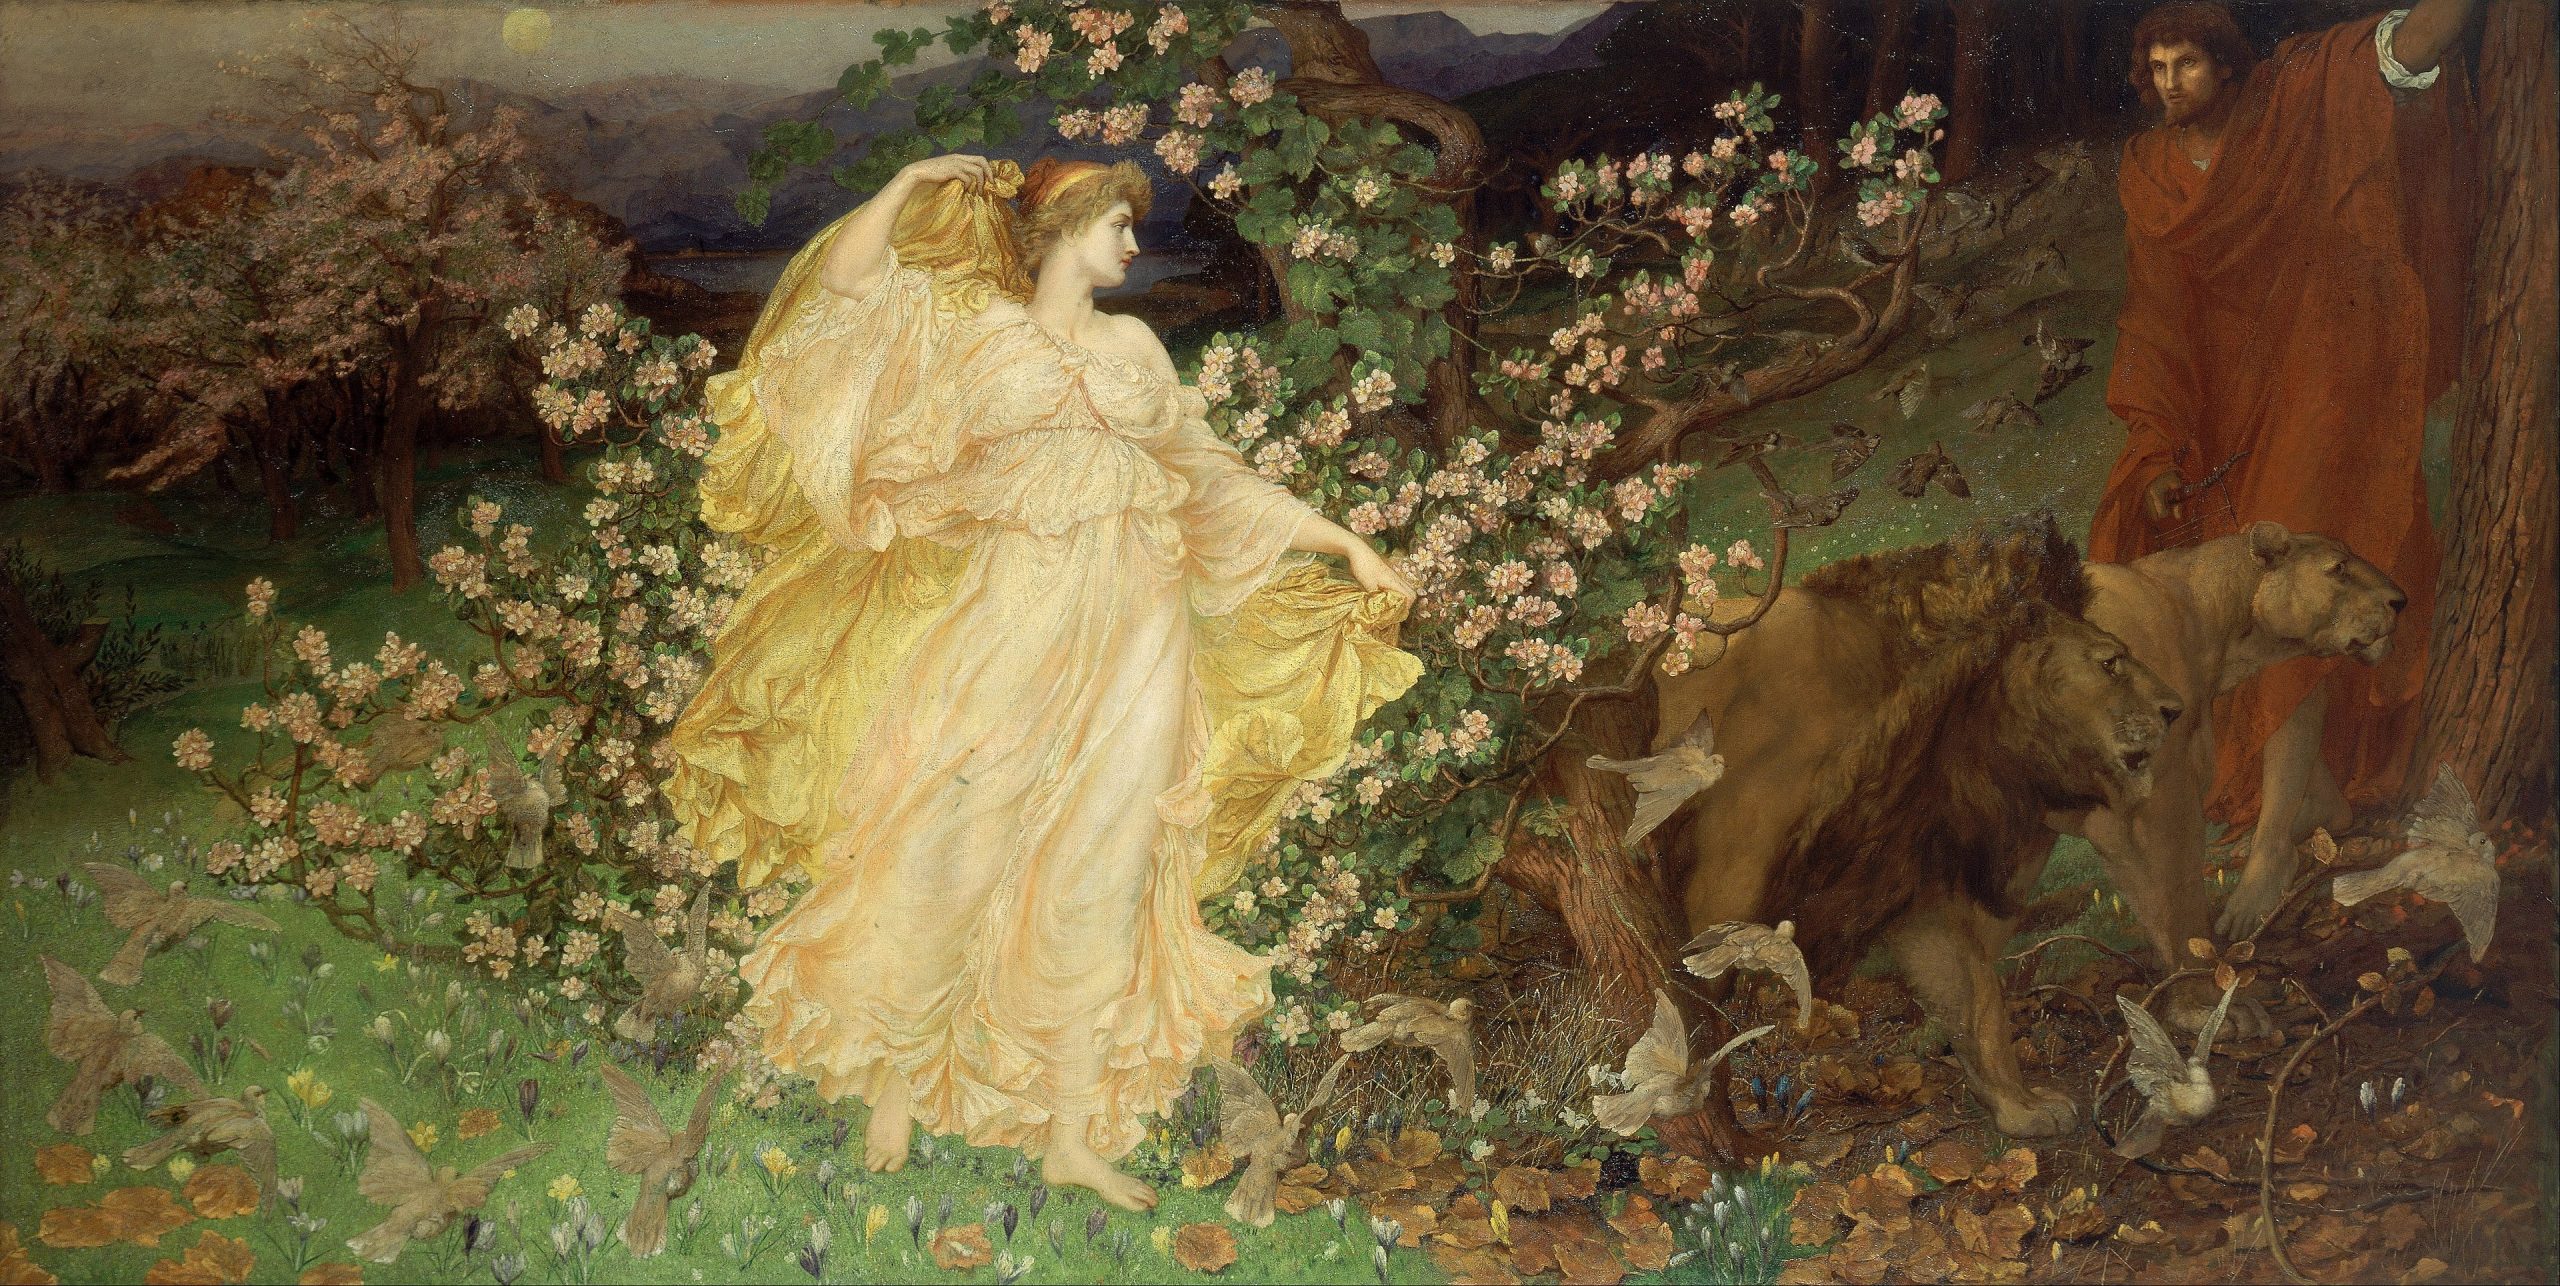 A goddess surrounded by flowers approaches a man behind a lion and lioness in a forest